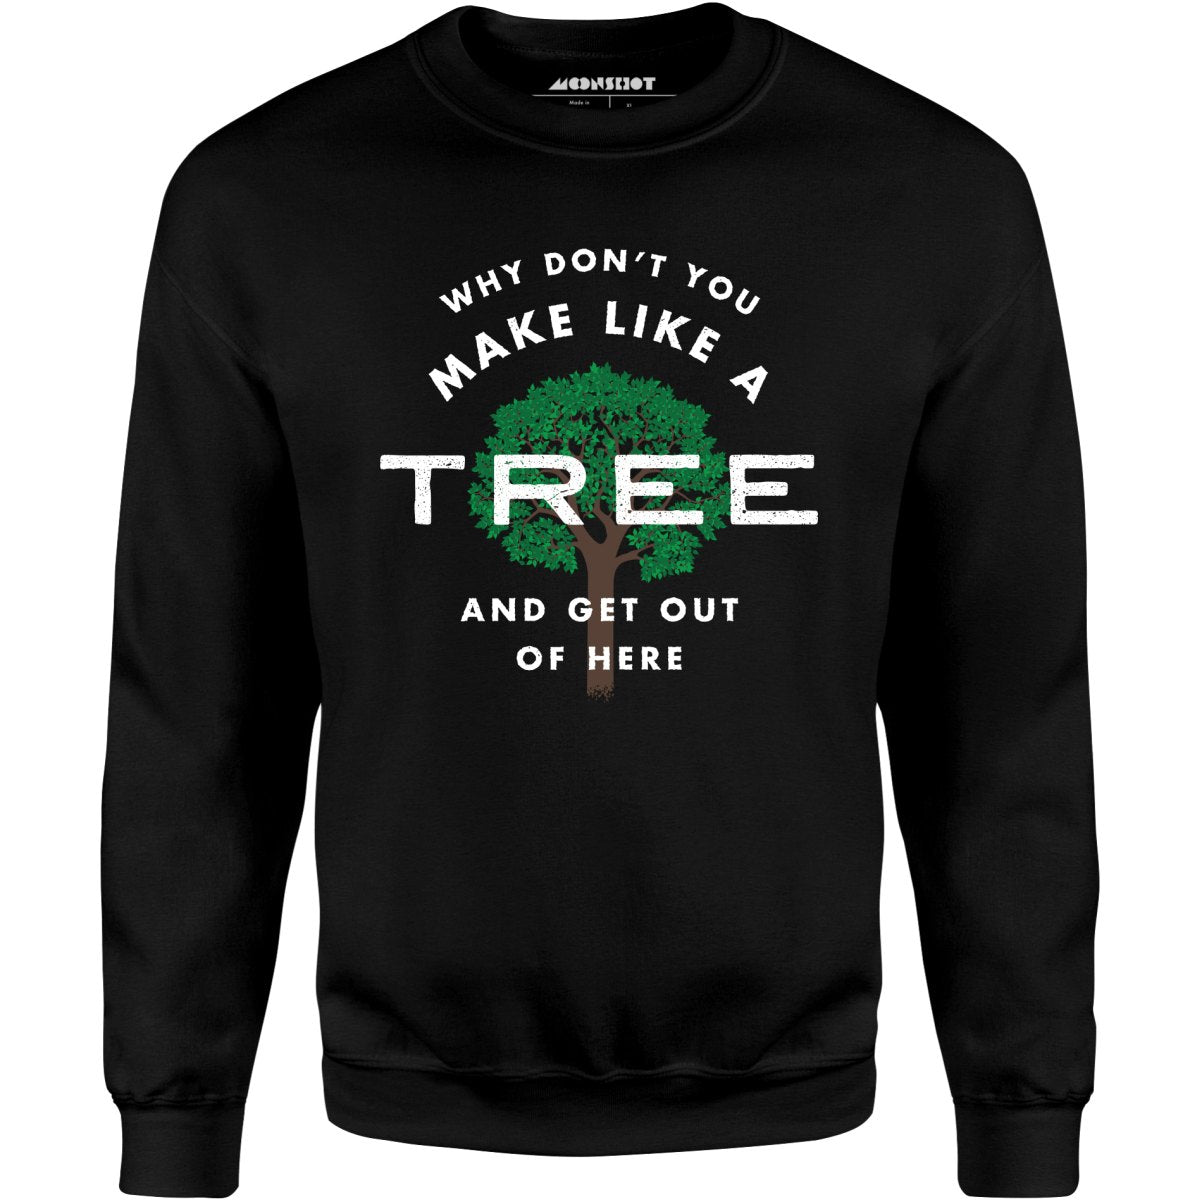 Why Don't You Make Like a Tree and Get Out of Here - Unisex Sweatshirt